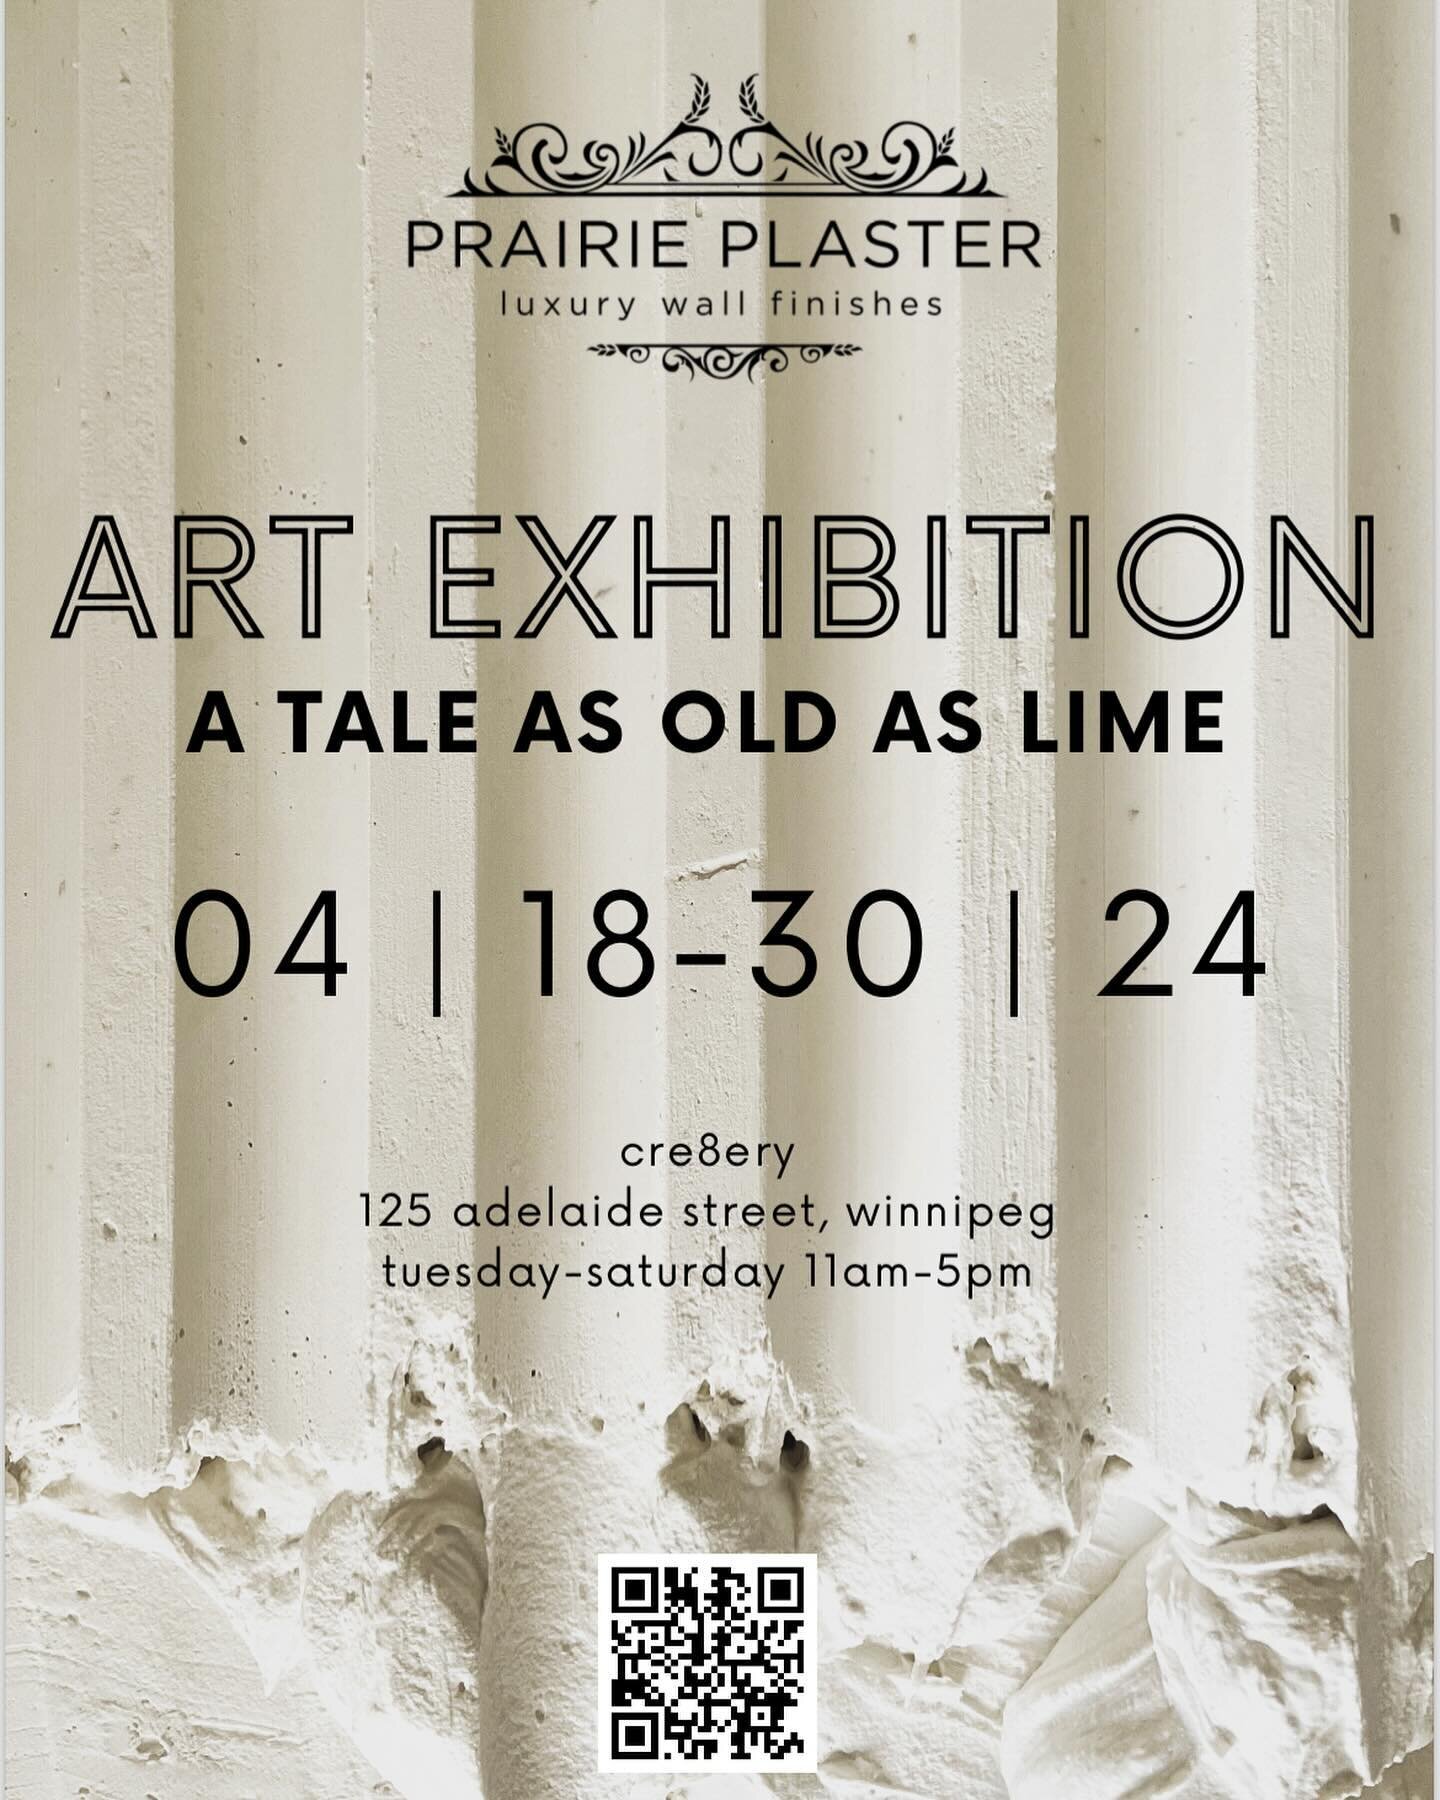 Hi Everyone! Join me for my first solo exhibition at Cre8ery Art Gallery starting April 18th running until April 30th, open Tuesdays-Saturdays 11am-5pm. Evenings by appointment.

Step into the captivating art show, &ldquo;A Tale as Old as Lime,&rdquo